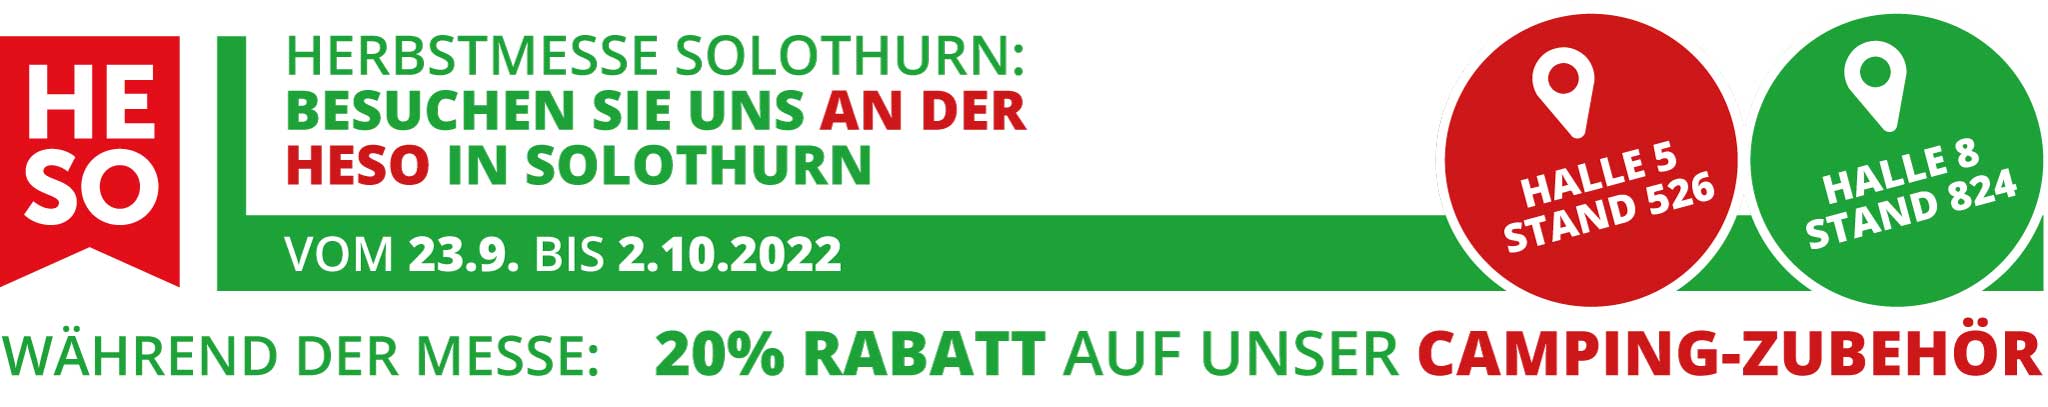 Herbstmesse Solothurn • Mobiliving 2022